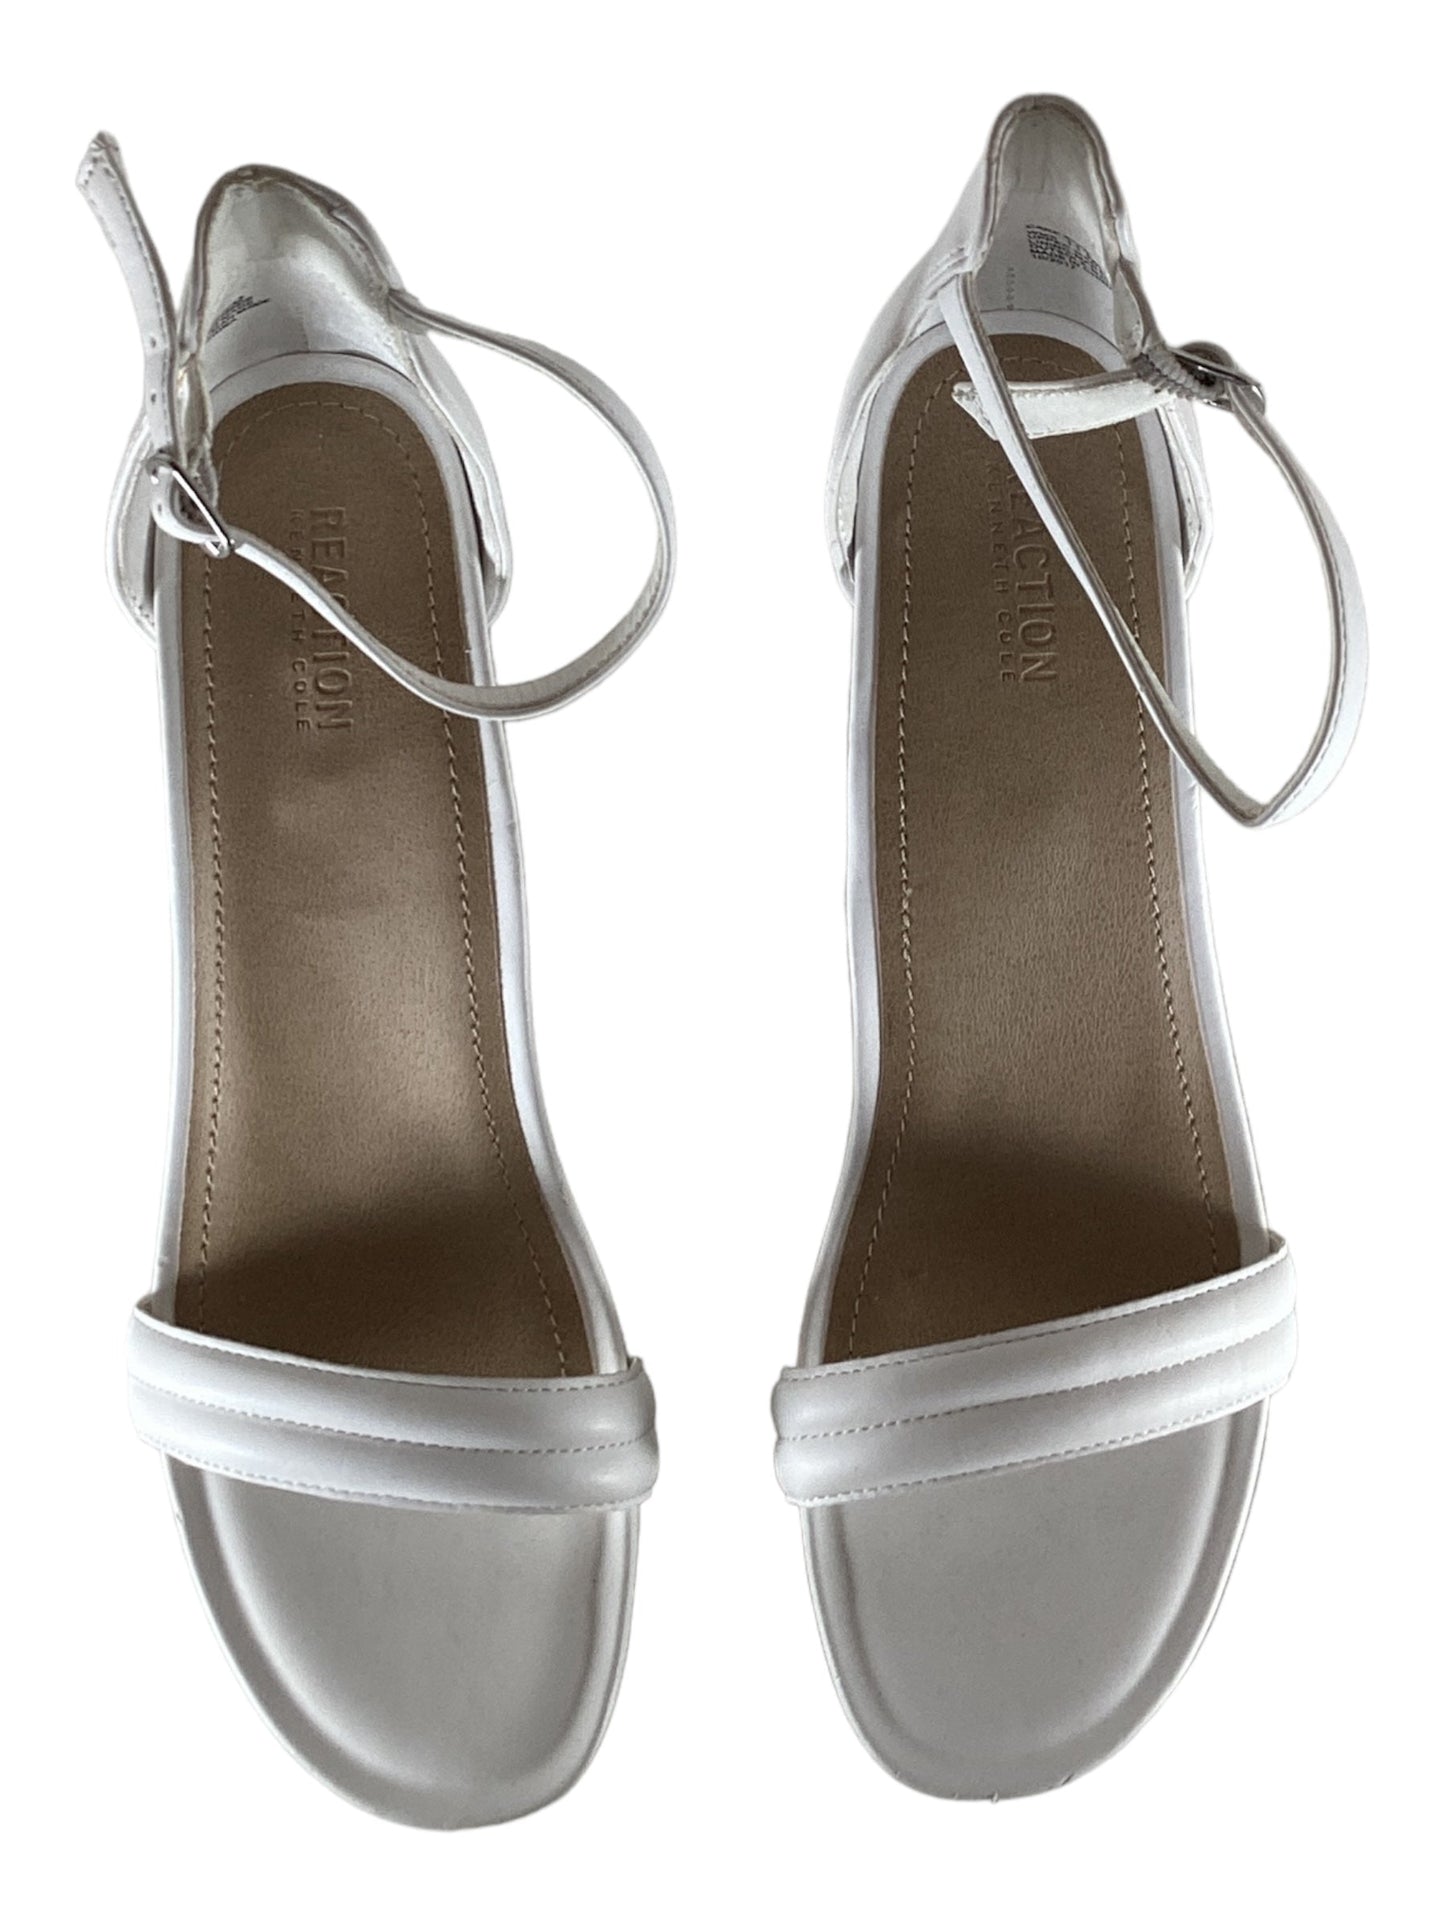 White Sandals Heels Wedge Kenneth Cole Reaction, Size 11